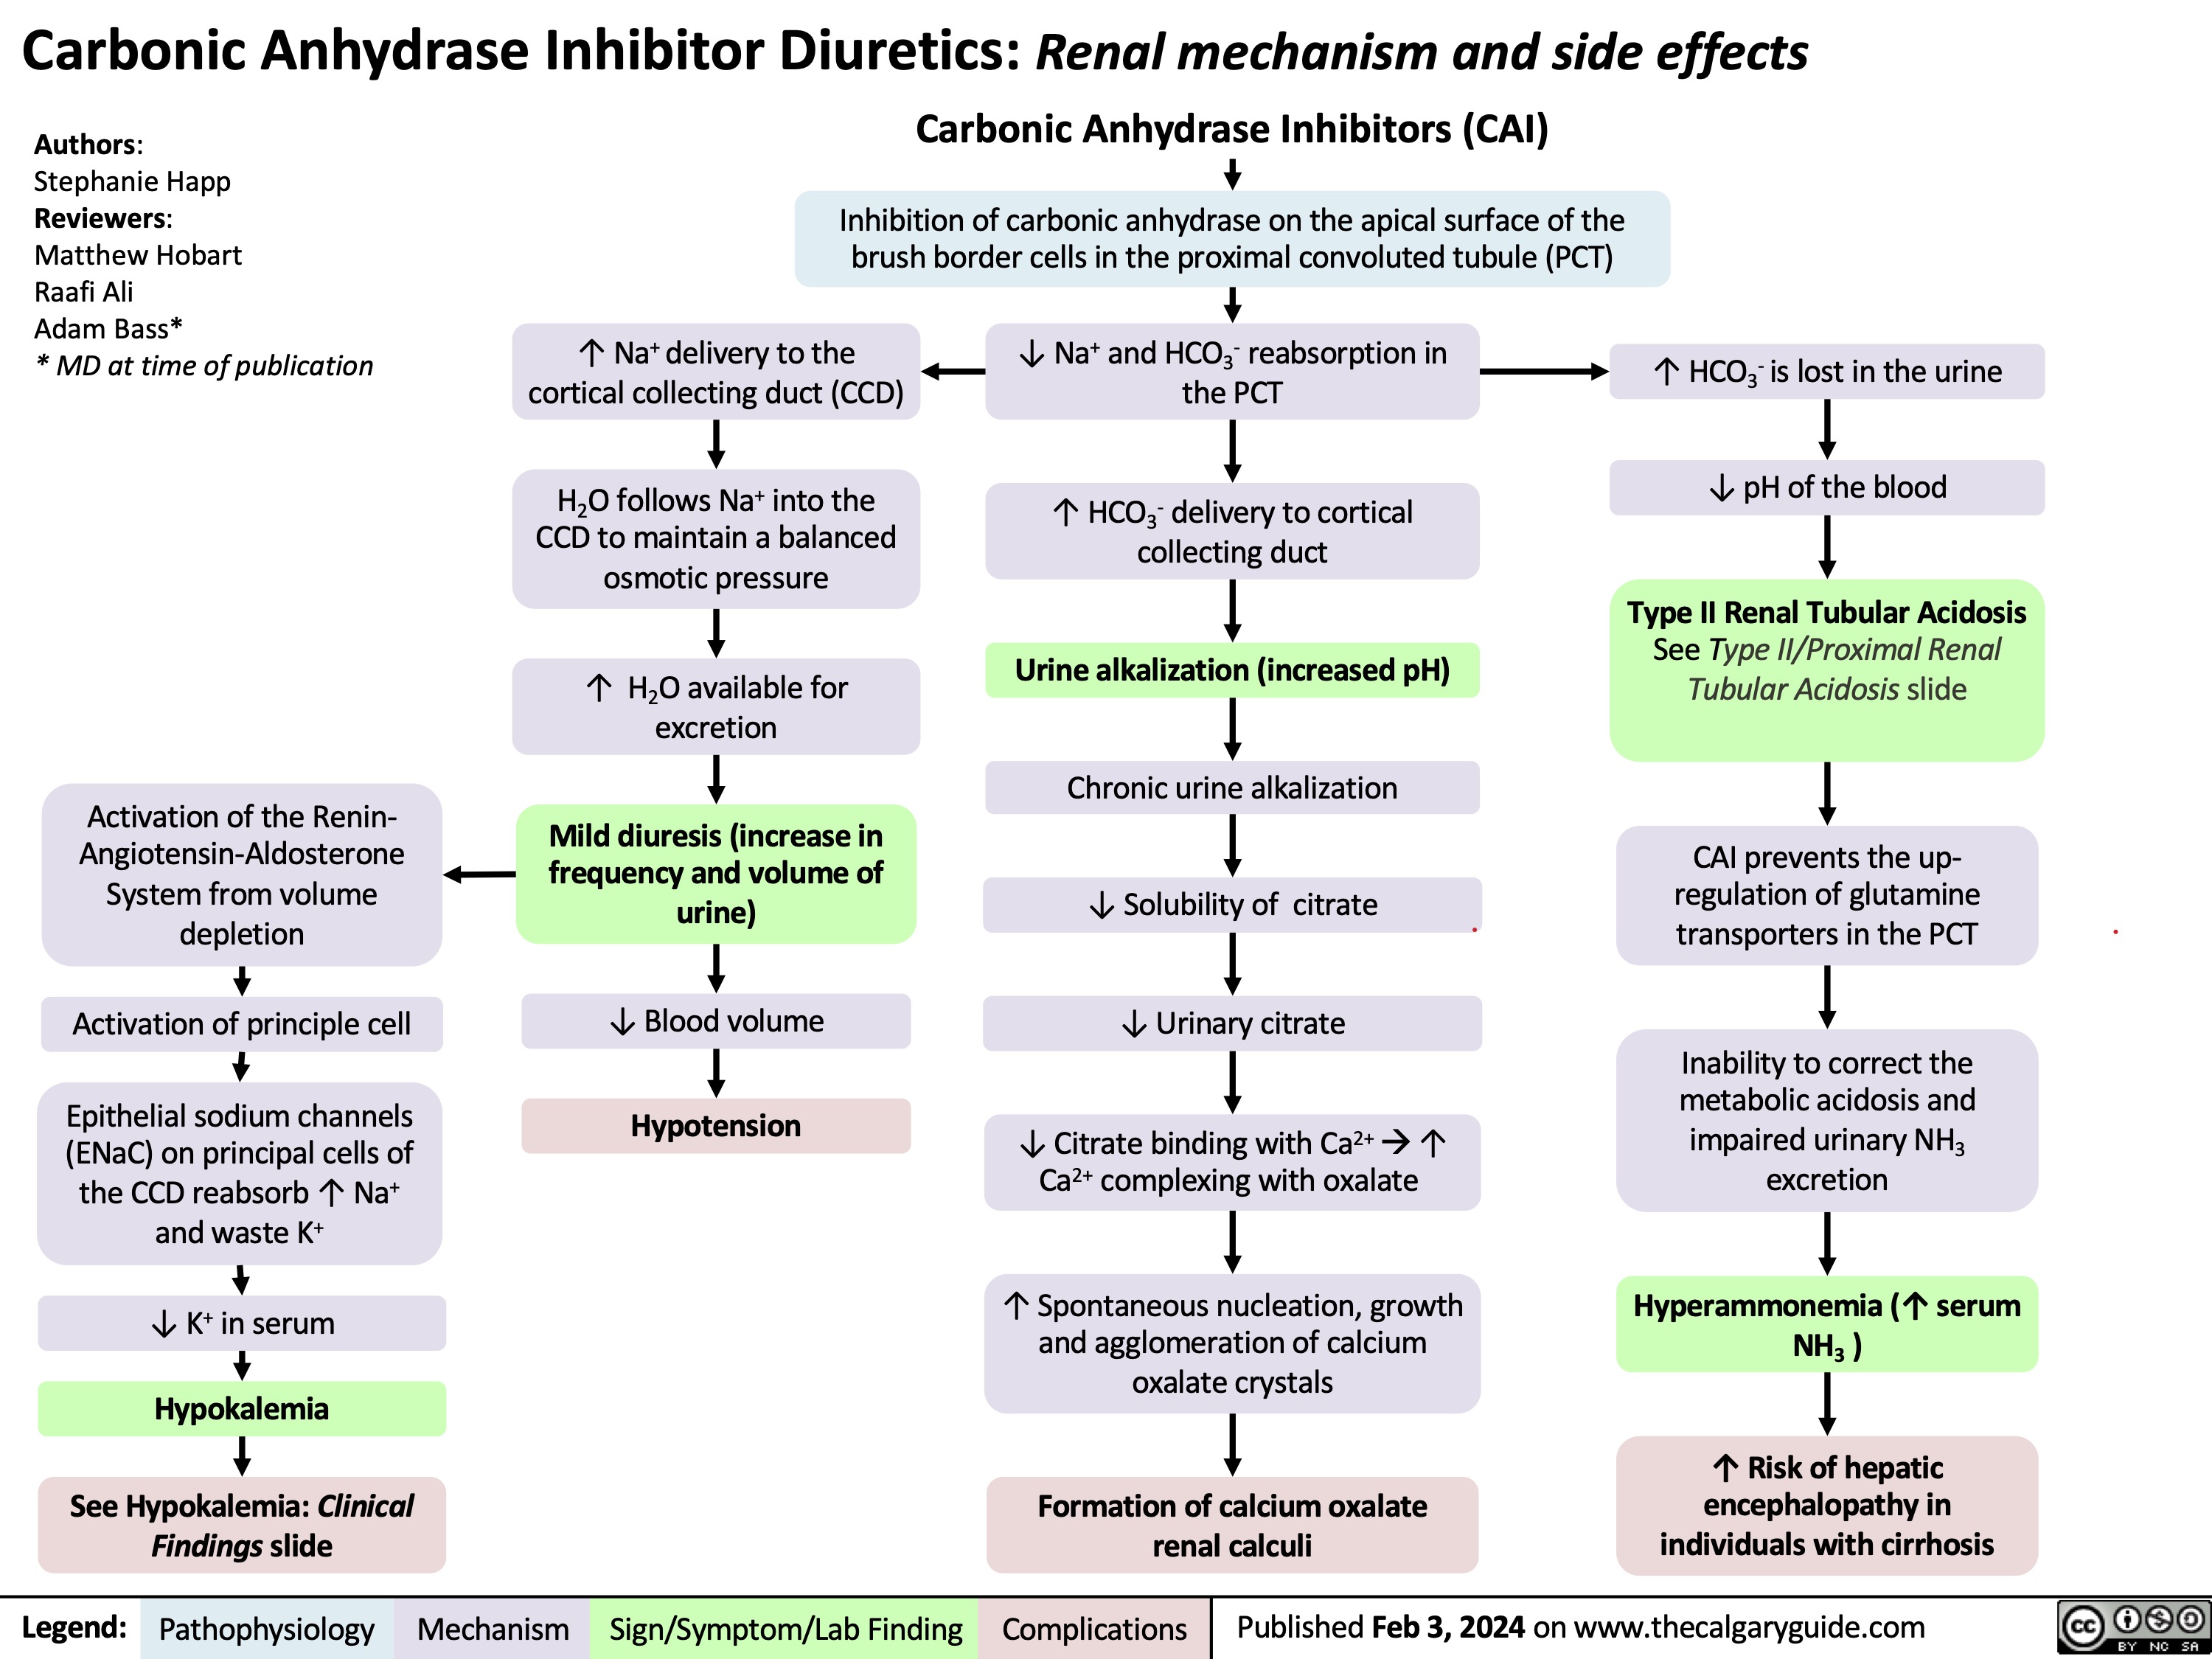 Carbonic Anhydrase Inhibitor Diuretics: Renal mechanism and side effects
Authors:
Stephanie Happ Reviewers:
Matthew Hobart
Raafi Ali
Adam Bass*
* MD at time of publication
Carbonic Anhydrase Inhibitors (CAI)
Inhibition of carbonic anhydrase on the apical surface of the brush border cells in the proximal convoluted tubule (PCT)
             Activation of the Renin- Angiotensin-Aldosterone Systemfromvolume depletion
Activation of principle cell
Epithelial sodium channels (ENaC) on principal cells of the CCD reabsorb ↑ Na+ and waste K+
↓ K+ in serum
Hypokalemia
See Hypokalemia: Clinical
Findings slide
↑ Na+ delivery to the cortical collecting duct (CCD)
H2O follows Na+ into the CCD to maintain a balanced osmotic pressure
↑ H2O available for excretion
Mild diuresis (increase in frequencyandvolumeof urine)
↓ Blood volume
Hypotension
↓ Na+ and HCO3- reabsorption in the PCT
↑ HCO3- delivery to cortical collecting duct
Urine alkalization (increased pH)
Chronic urine alkalization
↓Solubilityof citrate
↓ Urinary citrate
↓ Citrate binding with Ca2+à↑ Ca2+ complexing with oxalate
↑ Spontaneous nucleation, growth and agglomeration of calcium oxalate crystals
Formation of calcium oxalate renal calculi
↑ HCO3- is lost in the urine ↓ pH of the blood
Type II Renal Tubular Acidosis
See Type II/Proximal Renal Tubular Acidosis slide
CAI prevents the up- regulationofglutamine transporters in the PCT
Inability to correct the metabolic acidosis and impaired urinary NH3 excretion
Hyperammonemia (↑ serum NH3 )
↑ Risk of hepatic encephalopathy in individuals with cirrhosis
                  Legend:
 Pathophysiology
 Mechanism
Sign/Symptom/Lab Finding
 Complications
 Published Feb 3, 2024 on www.thecalgaryguide.com
  
Carbonic Anhydrase Inhibitor Diuretics: Renal Mechanism and Side Effects Carbonic Anhydrase Inhibitors (CAI)
Inhibition of carbonic anhydrase on the apical surface of the brush border cells of the proximal convoluted tubule (PCT)
Authors: Stephanie Happ Reviewers: Matt Hobart Name Name* * MD at time of publication
     ↓ Na+ and HCO3- reabsorption in the PCT
↑ Na+ delivery to the cortical collecting duct (CCD)
H2O follows Na+ into the CCD to maintain a balanced osmotic pressure
↑ H O available for 2
excretion
Mild diuresis
↓ Blood volume Hypotension
↑ HCO3- delivery to cortical collecting duct
Epithelial sodium channels (ENaC) on principal cells of the CCD reabsorb ↑ Na+
↑ Intracellular Na+ drives Na+/K+ ATPase activity on the principal cells (moving 2 K+ into cell and 3 Na+ out into the peritubular capillary)
↑ Intracellular K+ drives H+/K+ ATPase activity on the intercalated cells (moving 1 H+ into cell and 1 K+ out into the tubular filtrate)
↓ K+ in serum
Hypokalemia
See Hypokalemia: Clinical Findings slide
Urine alkalization
↑ HCO3- is lost in the urine, leading to ↓ pH of the blood
Renal Tubular Acidosis Type II
See Type II/Proximal Renal Tubular Acidosis slide
CAI inhibit the up-regulation of glutamine transporters in the PCT
Inability to correct the metabolic acidosis and
impaired urinary NH3 excretion
Hyperammonemia
↑ Risk of hepatic encephalopathy in individuals with cirrhosis
Chronic urine alkalization leads to marked ↓ in urinary citrate
↓ Ability of citrate to bind to Ca2+ and calcium oxalate stones
↓ Inhibition of spontaneous nucleation
↓ Prevention of growth and agglomeration of crystals
Formation of calcium oxalate renal calculi
                          Legend:
 Pathophysiology
 Mechanism
Sign/Symptom/Lab Finding
 Complications
Published MONTH, DAY, YEAR on www.thecalgaryguide.com
   